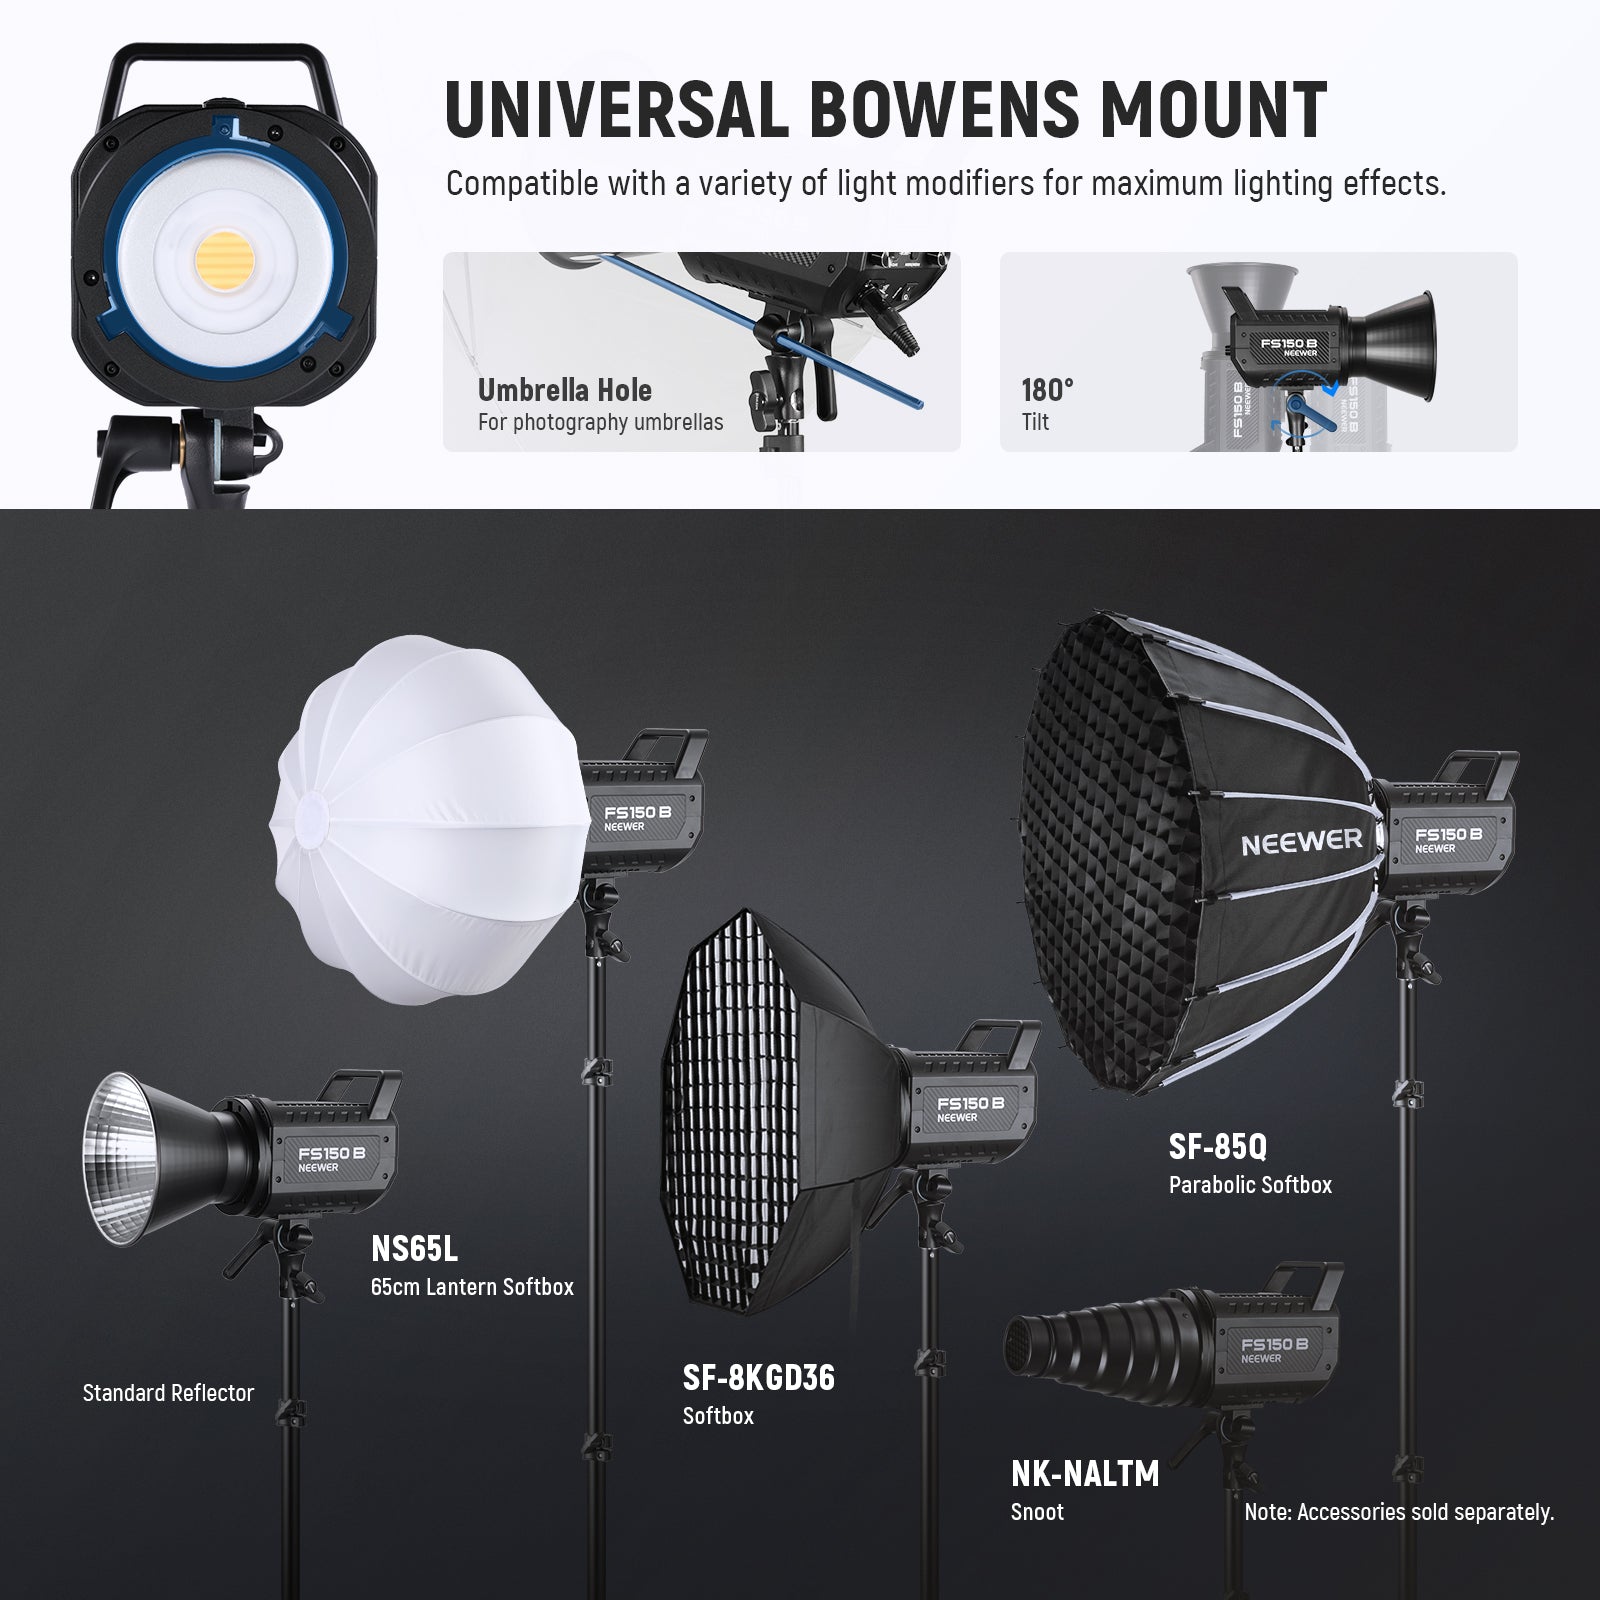 Introducing the Neewer MS150B 130W Bicolor LED Video Light 